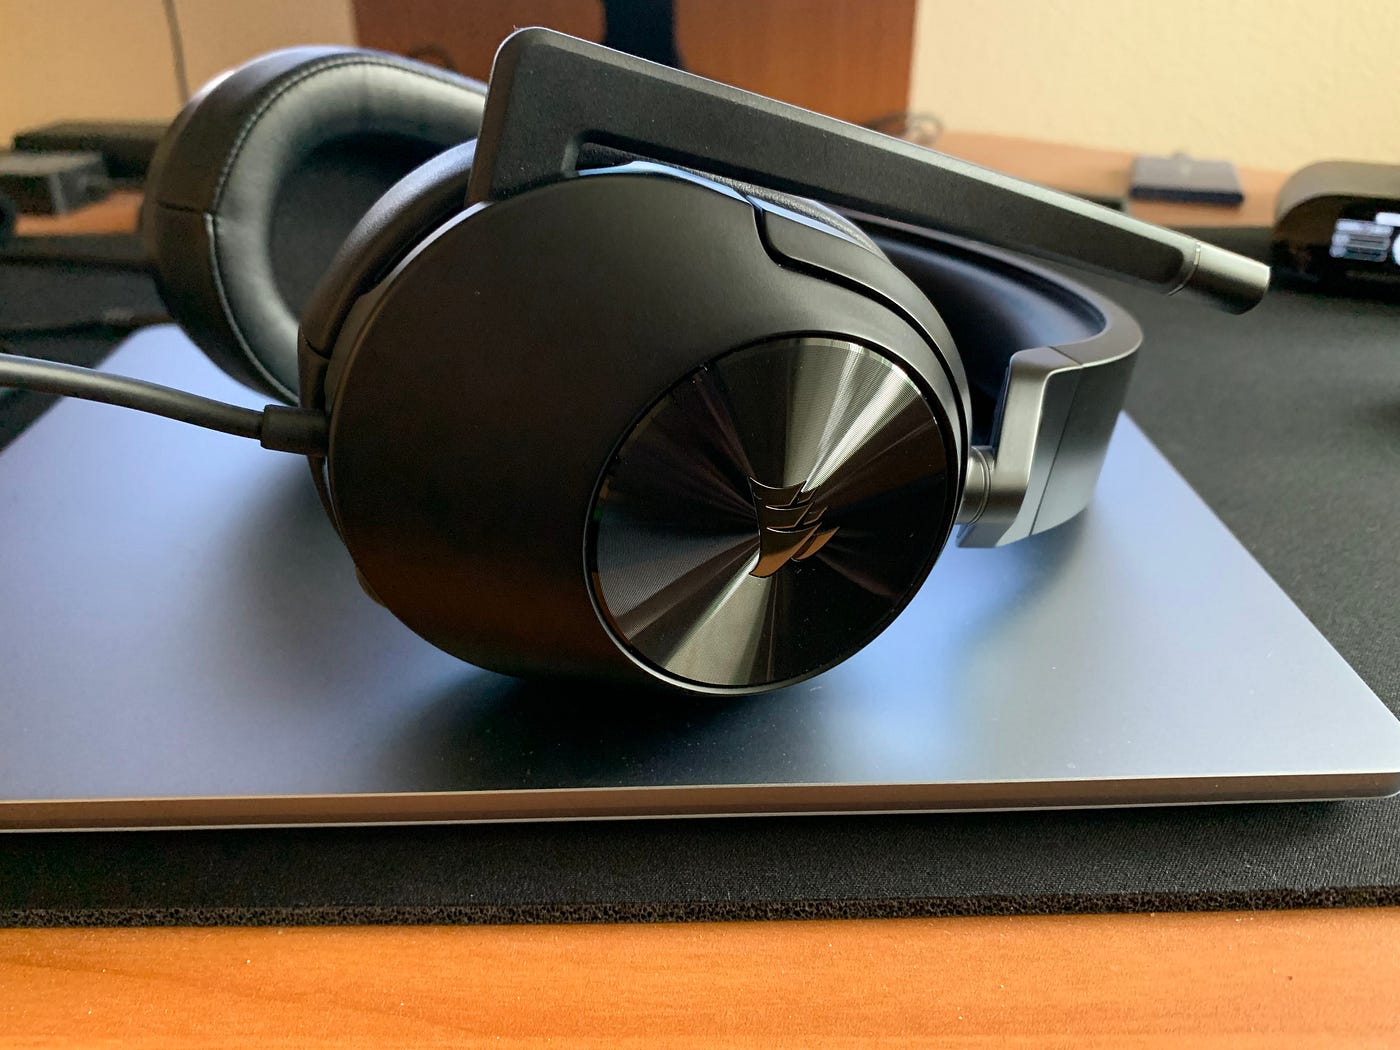 Gadget Review: Corsair HS55 Stereo Headset – Digitally Downloaded